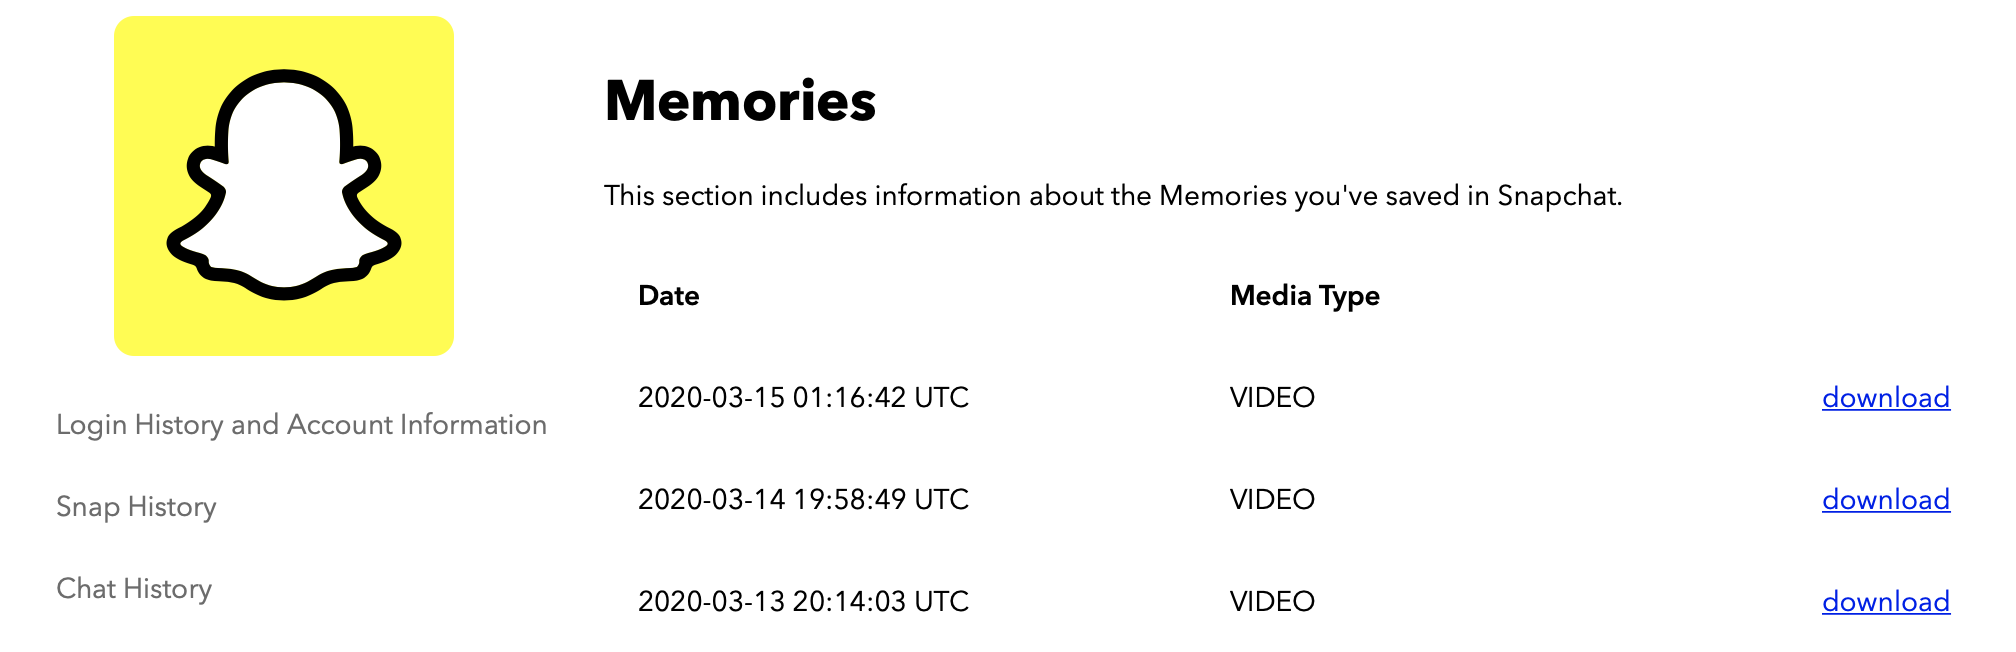 How To Download All Snap Memories